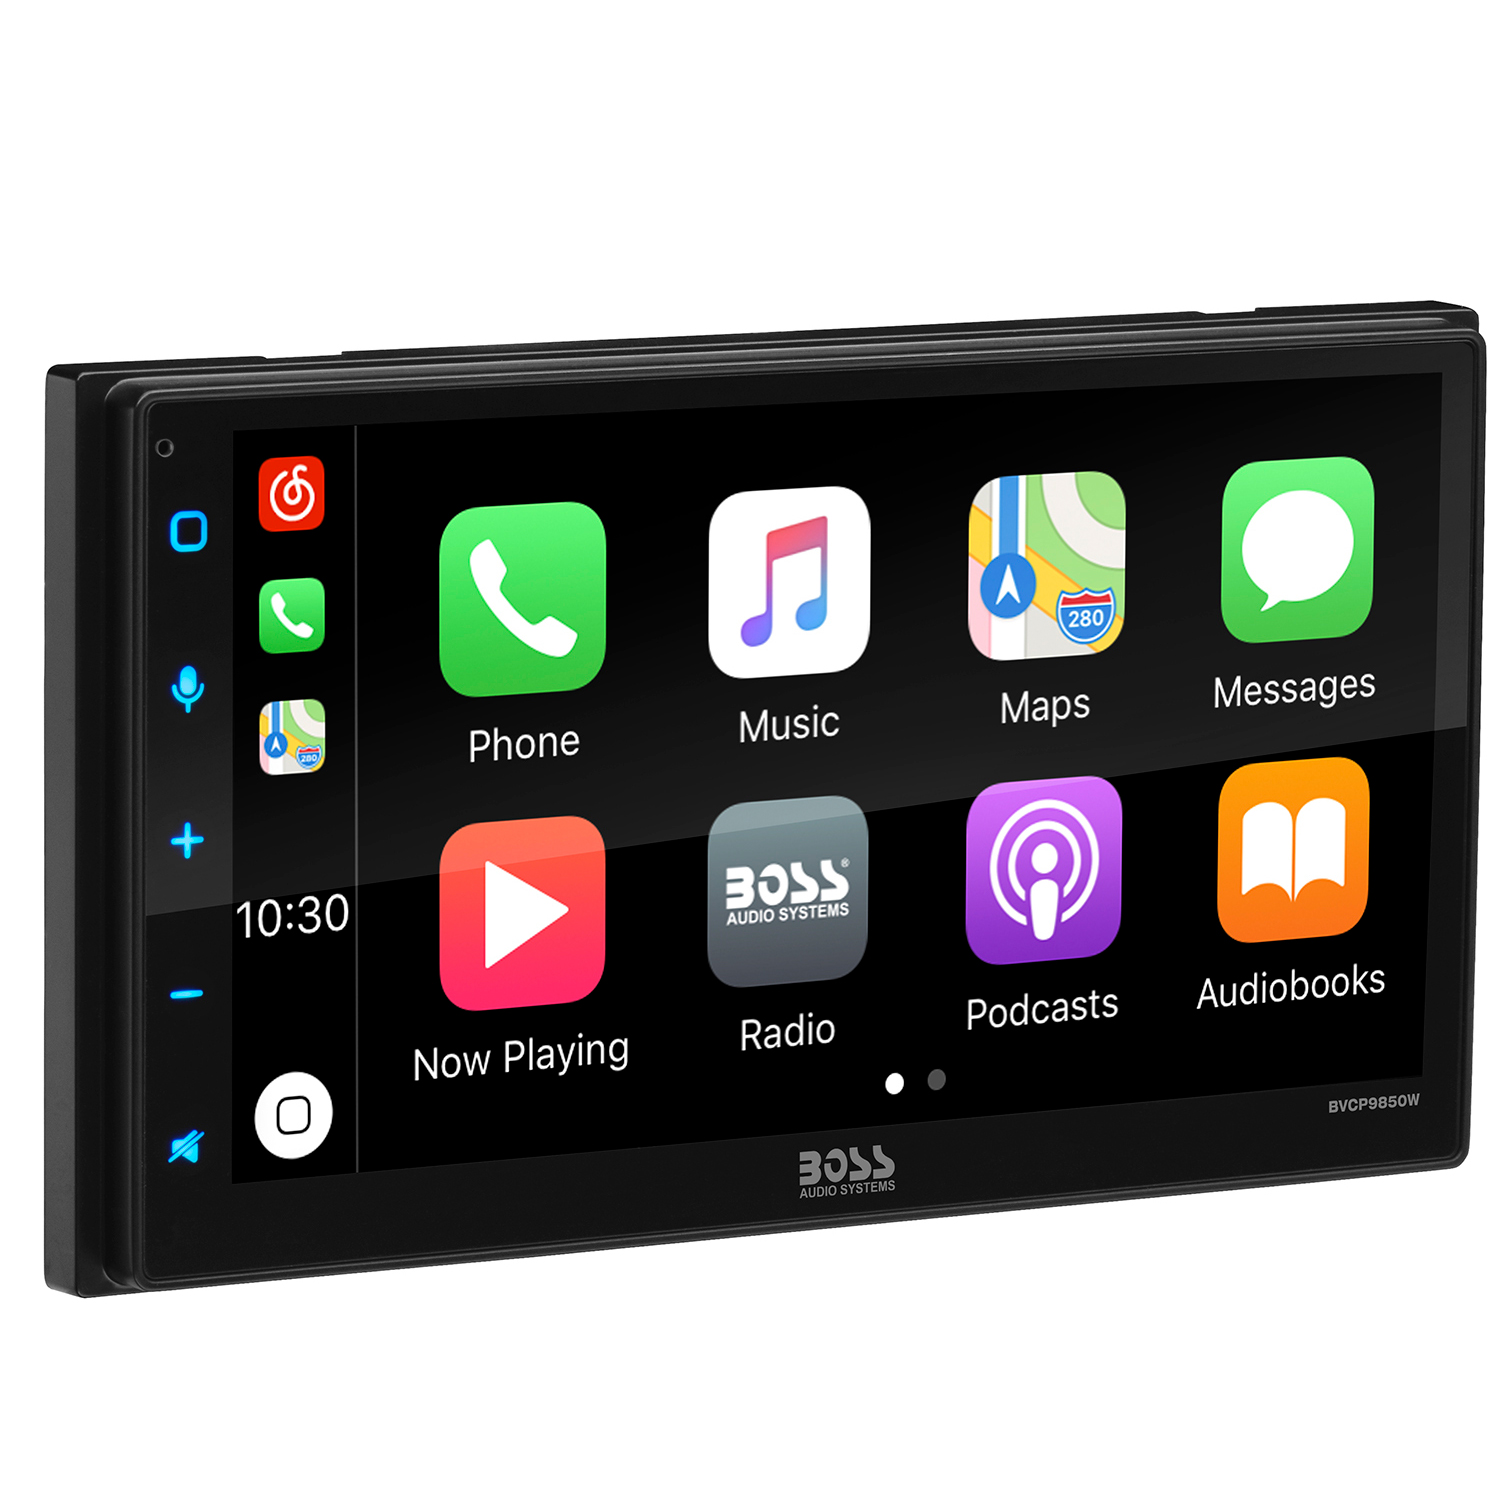 BOSS Audio Systems BVCP9850W Car Audio Stereo System, Wireless Apple CarPlay  and Android Auto, 6.75 inch Double Din, Touchscreen, Bluetooth Head Unit,  Radio Receiver, No CD Player, RGB Illumination